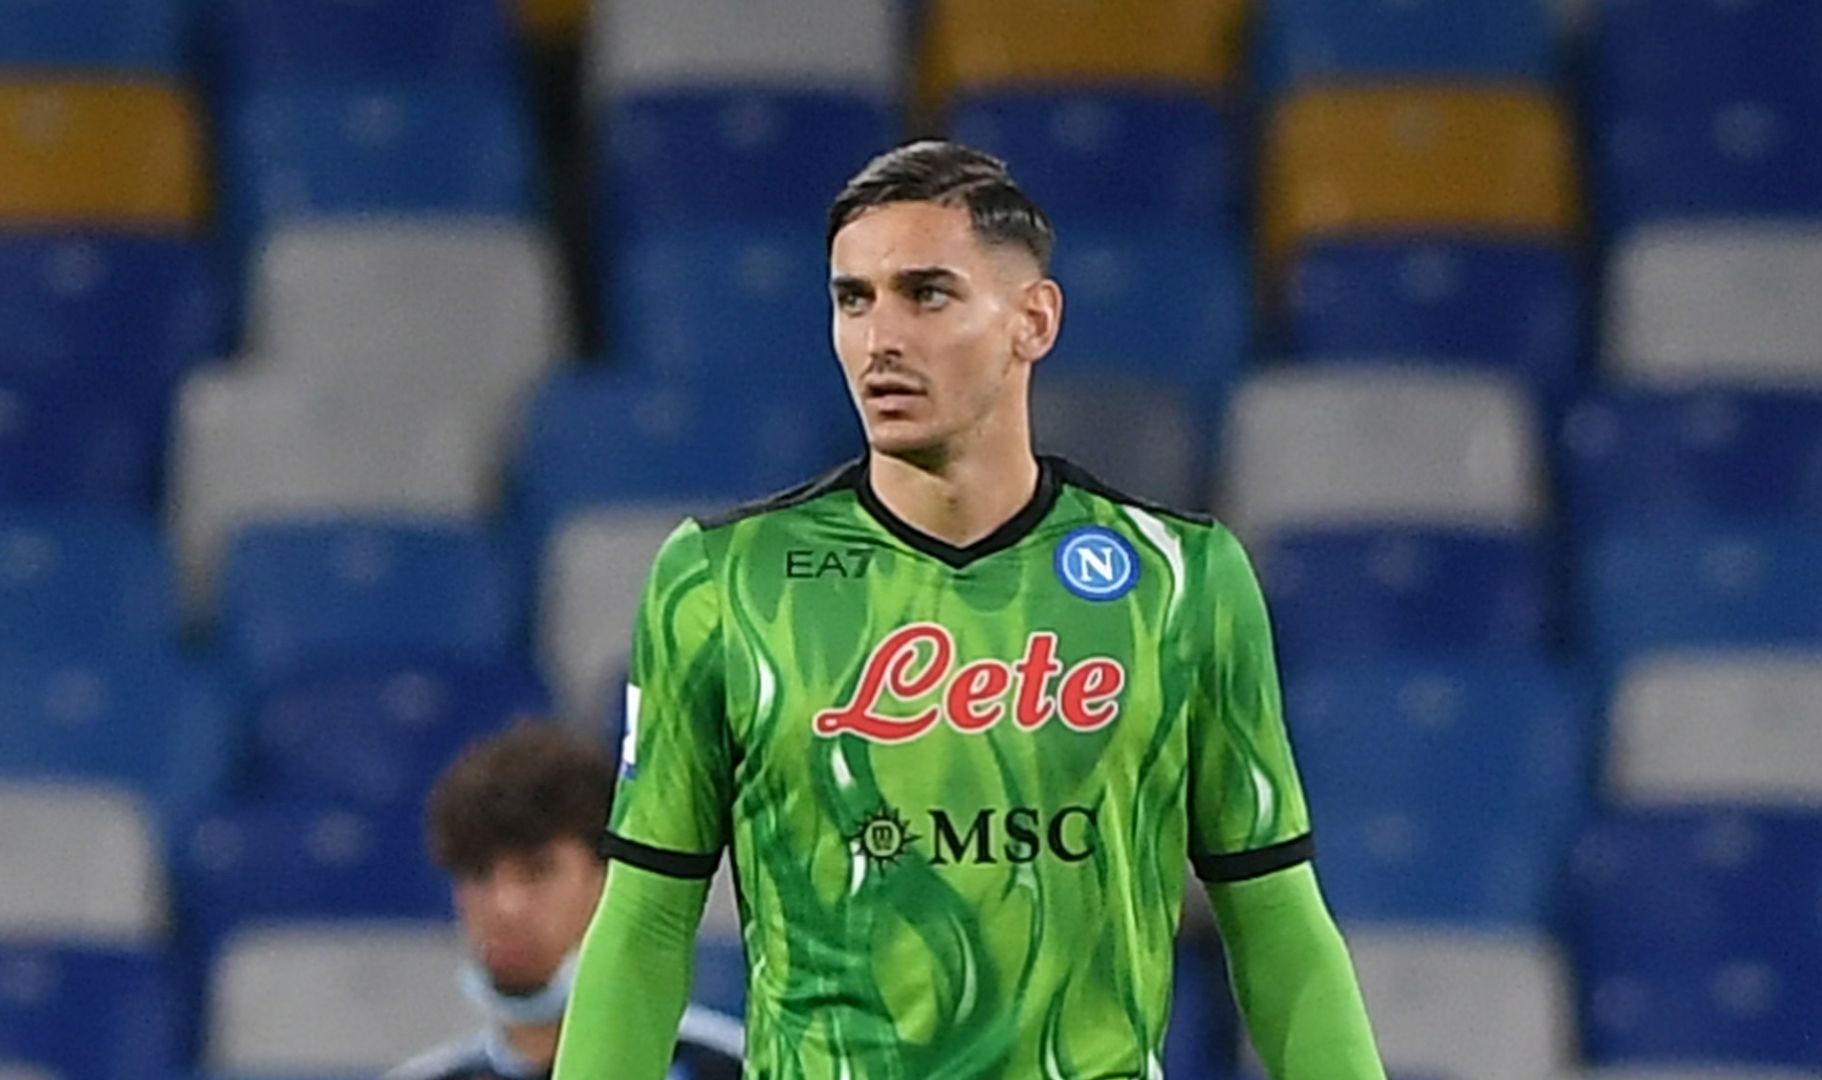 Napoli are closing in on a resolution after weeks of uncertainty and have picked their next starting goalkeeper, as Meret is nearing an extension.